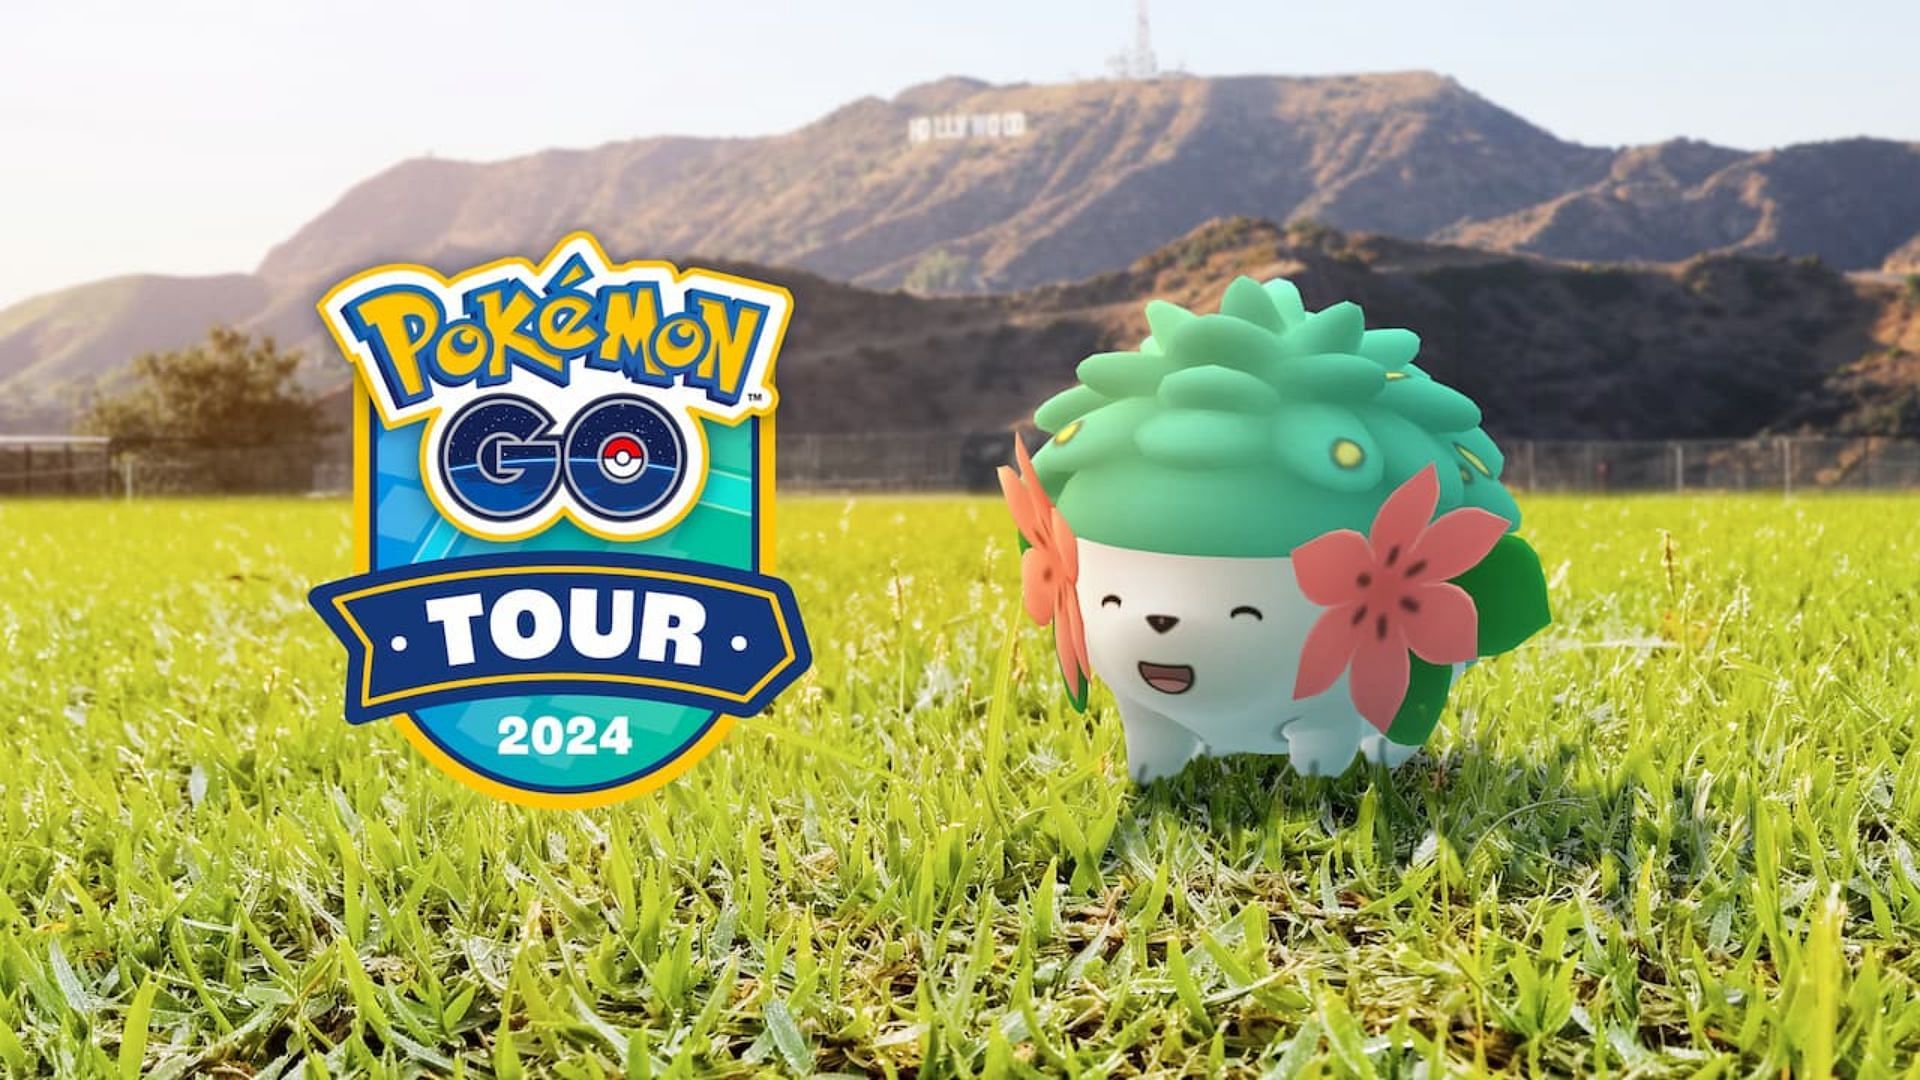 Shaymin in the GO Tour 2024 poster (Image via TPC)